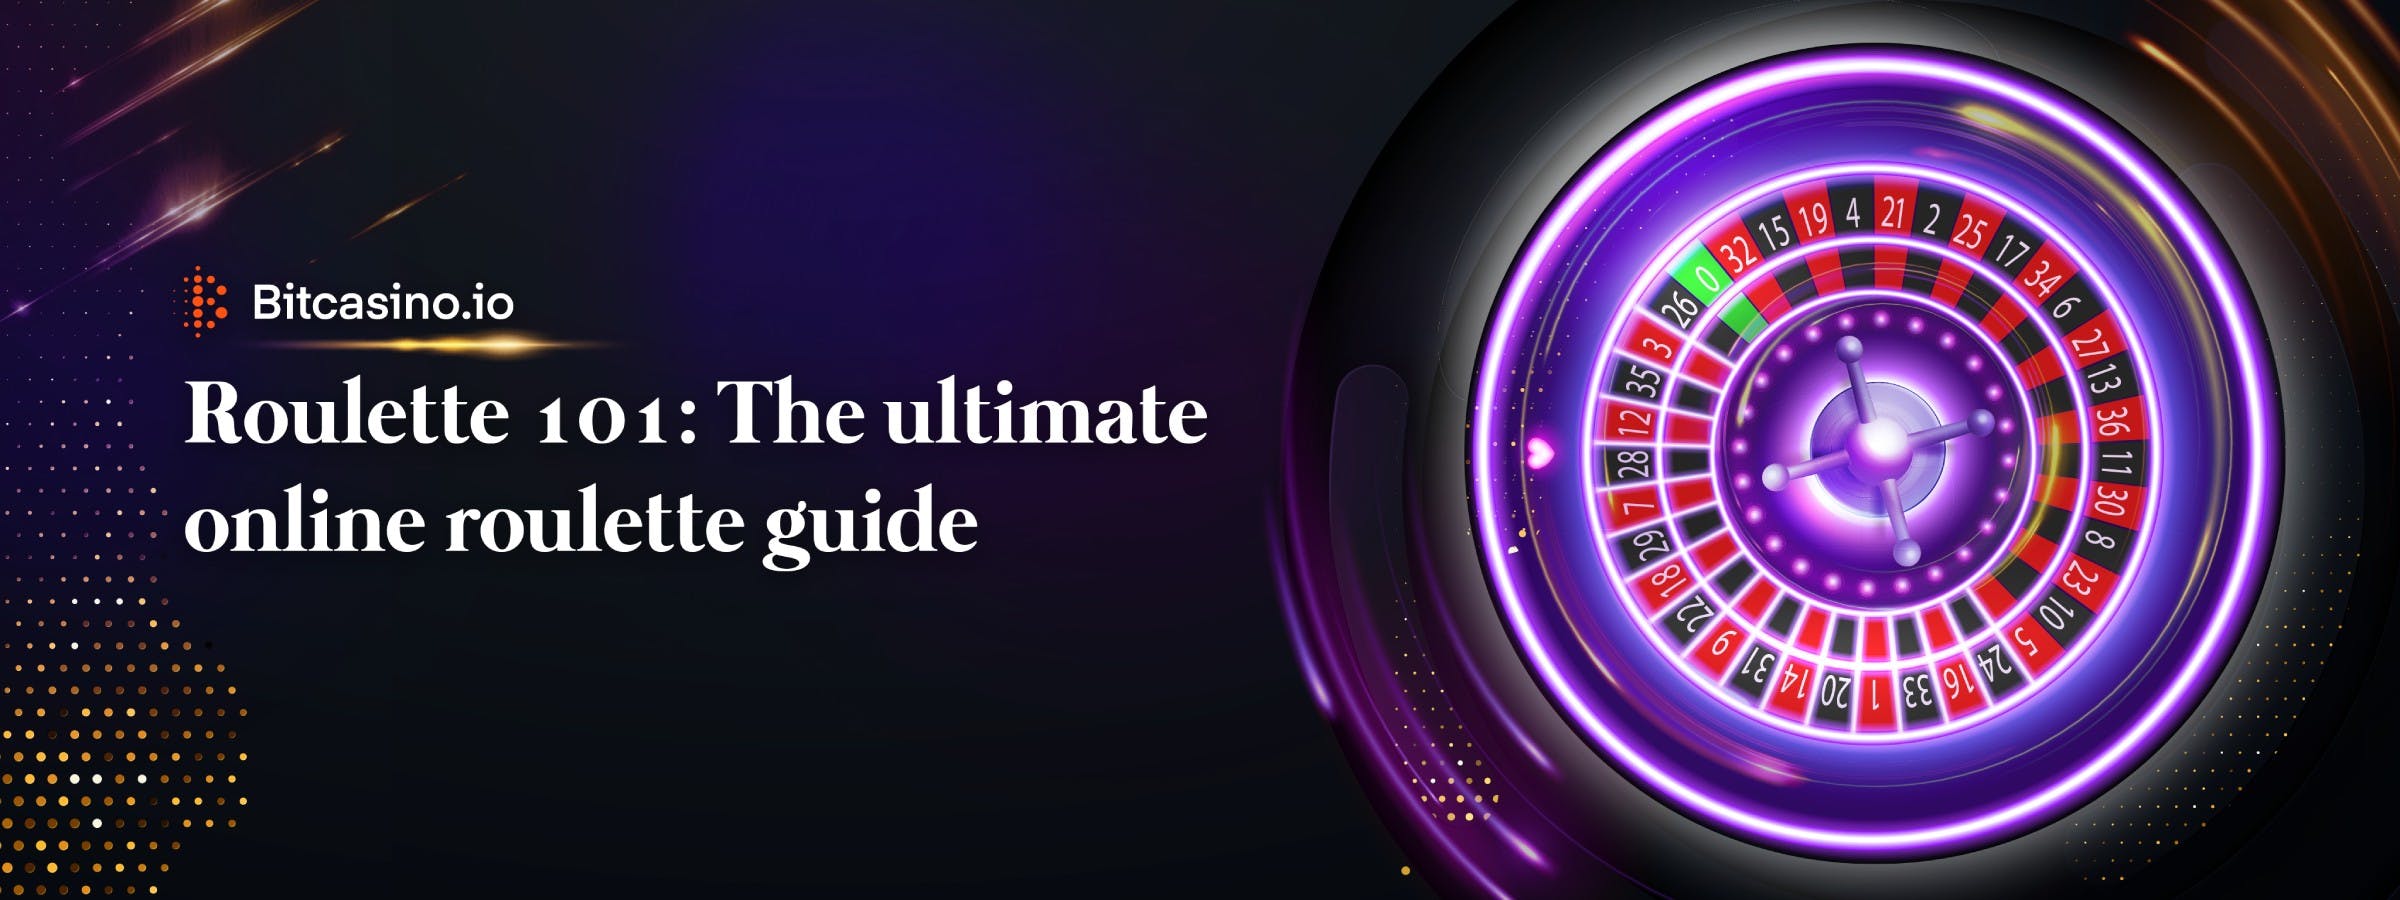 Roulette 101: The ultimate online roulette guide